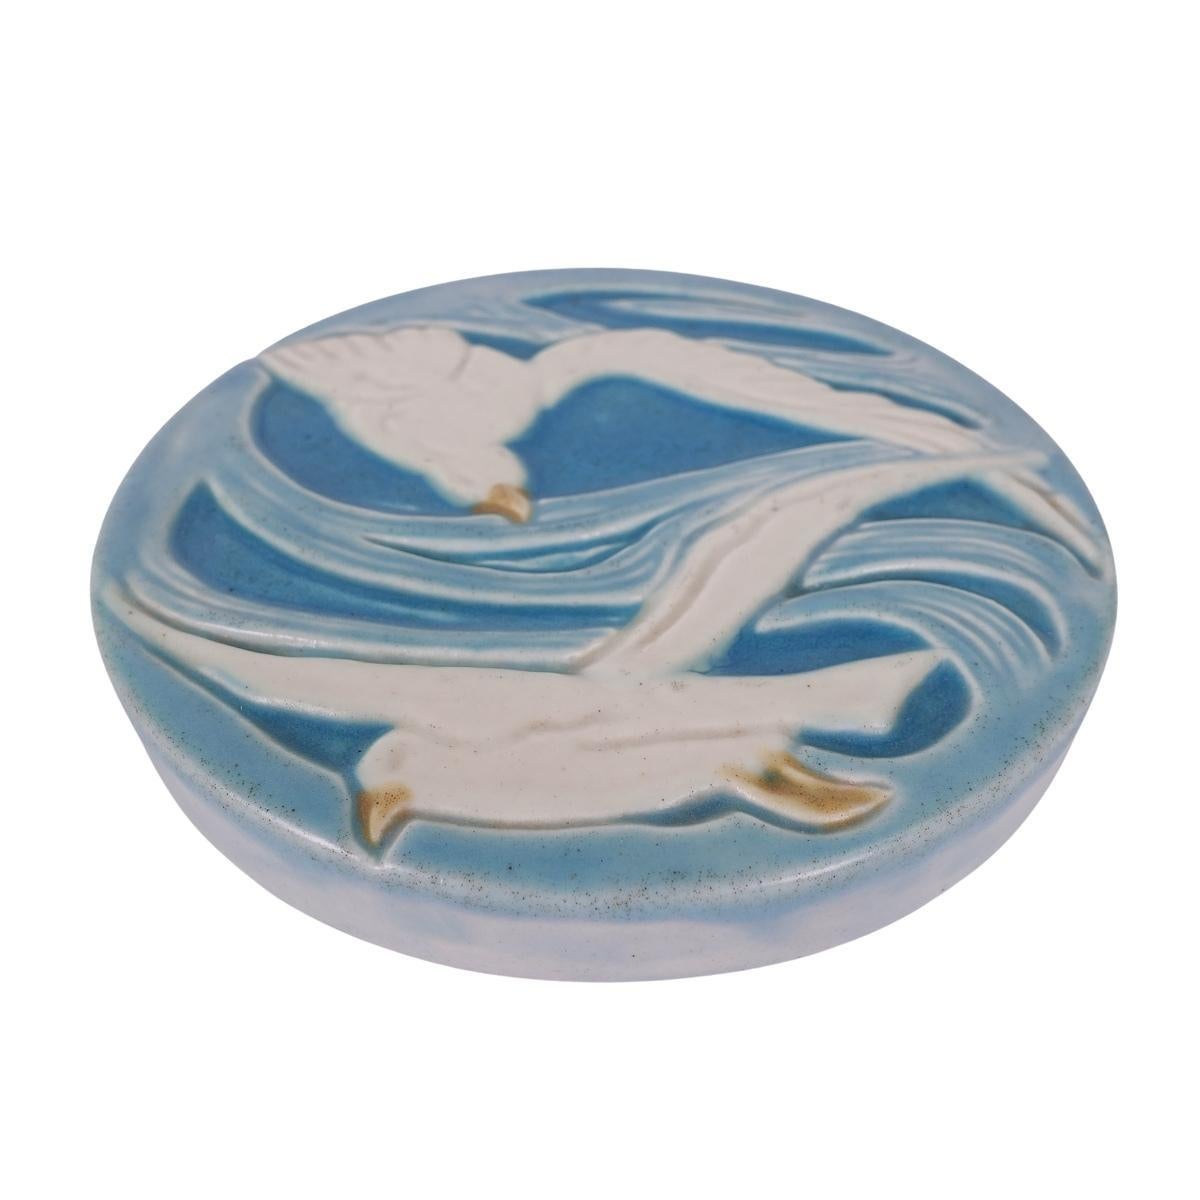 Offering this gorgeous hand-painted vellum Rookwood pottery trivet tile featuring two seagull designs. This tile trivet is hand-painted with beautiful hues of blue and aqua, cream and yellow beak accents. Signed with the impressed 